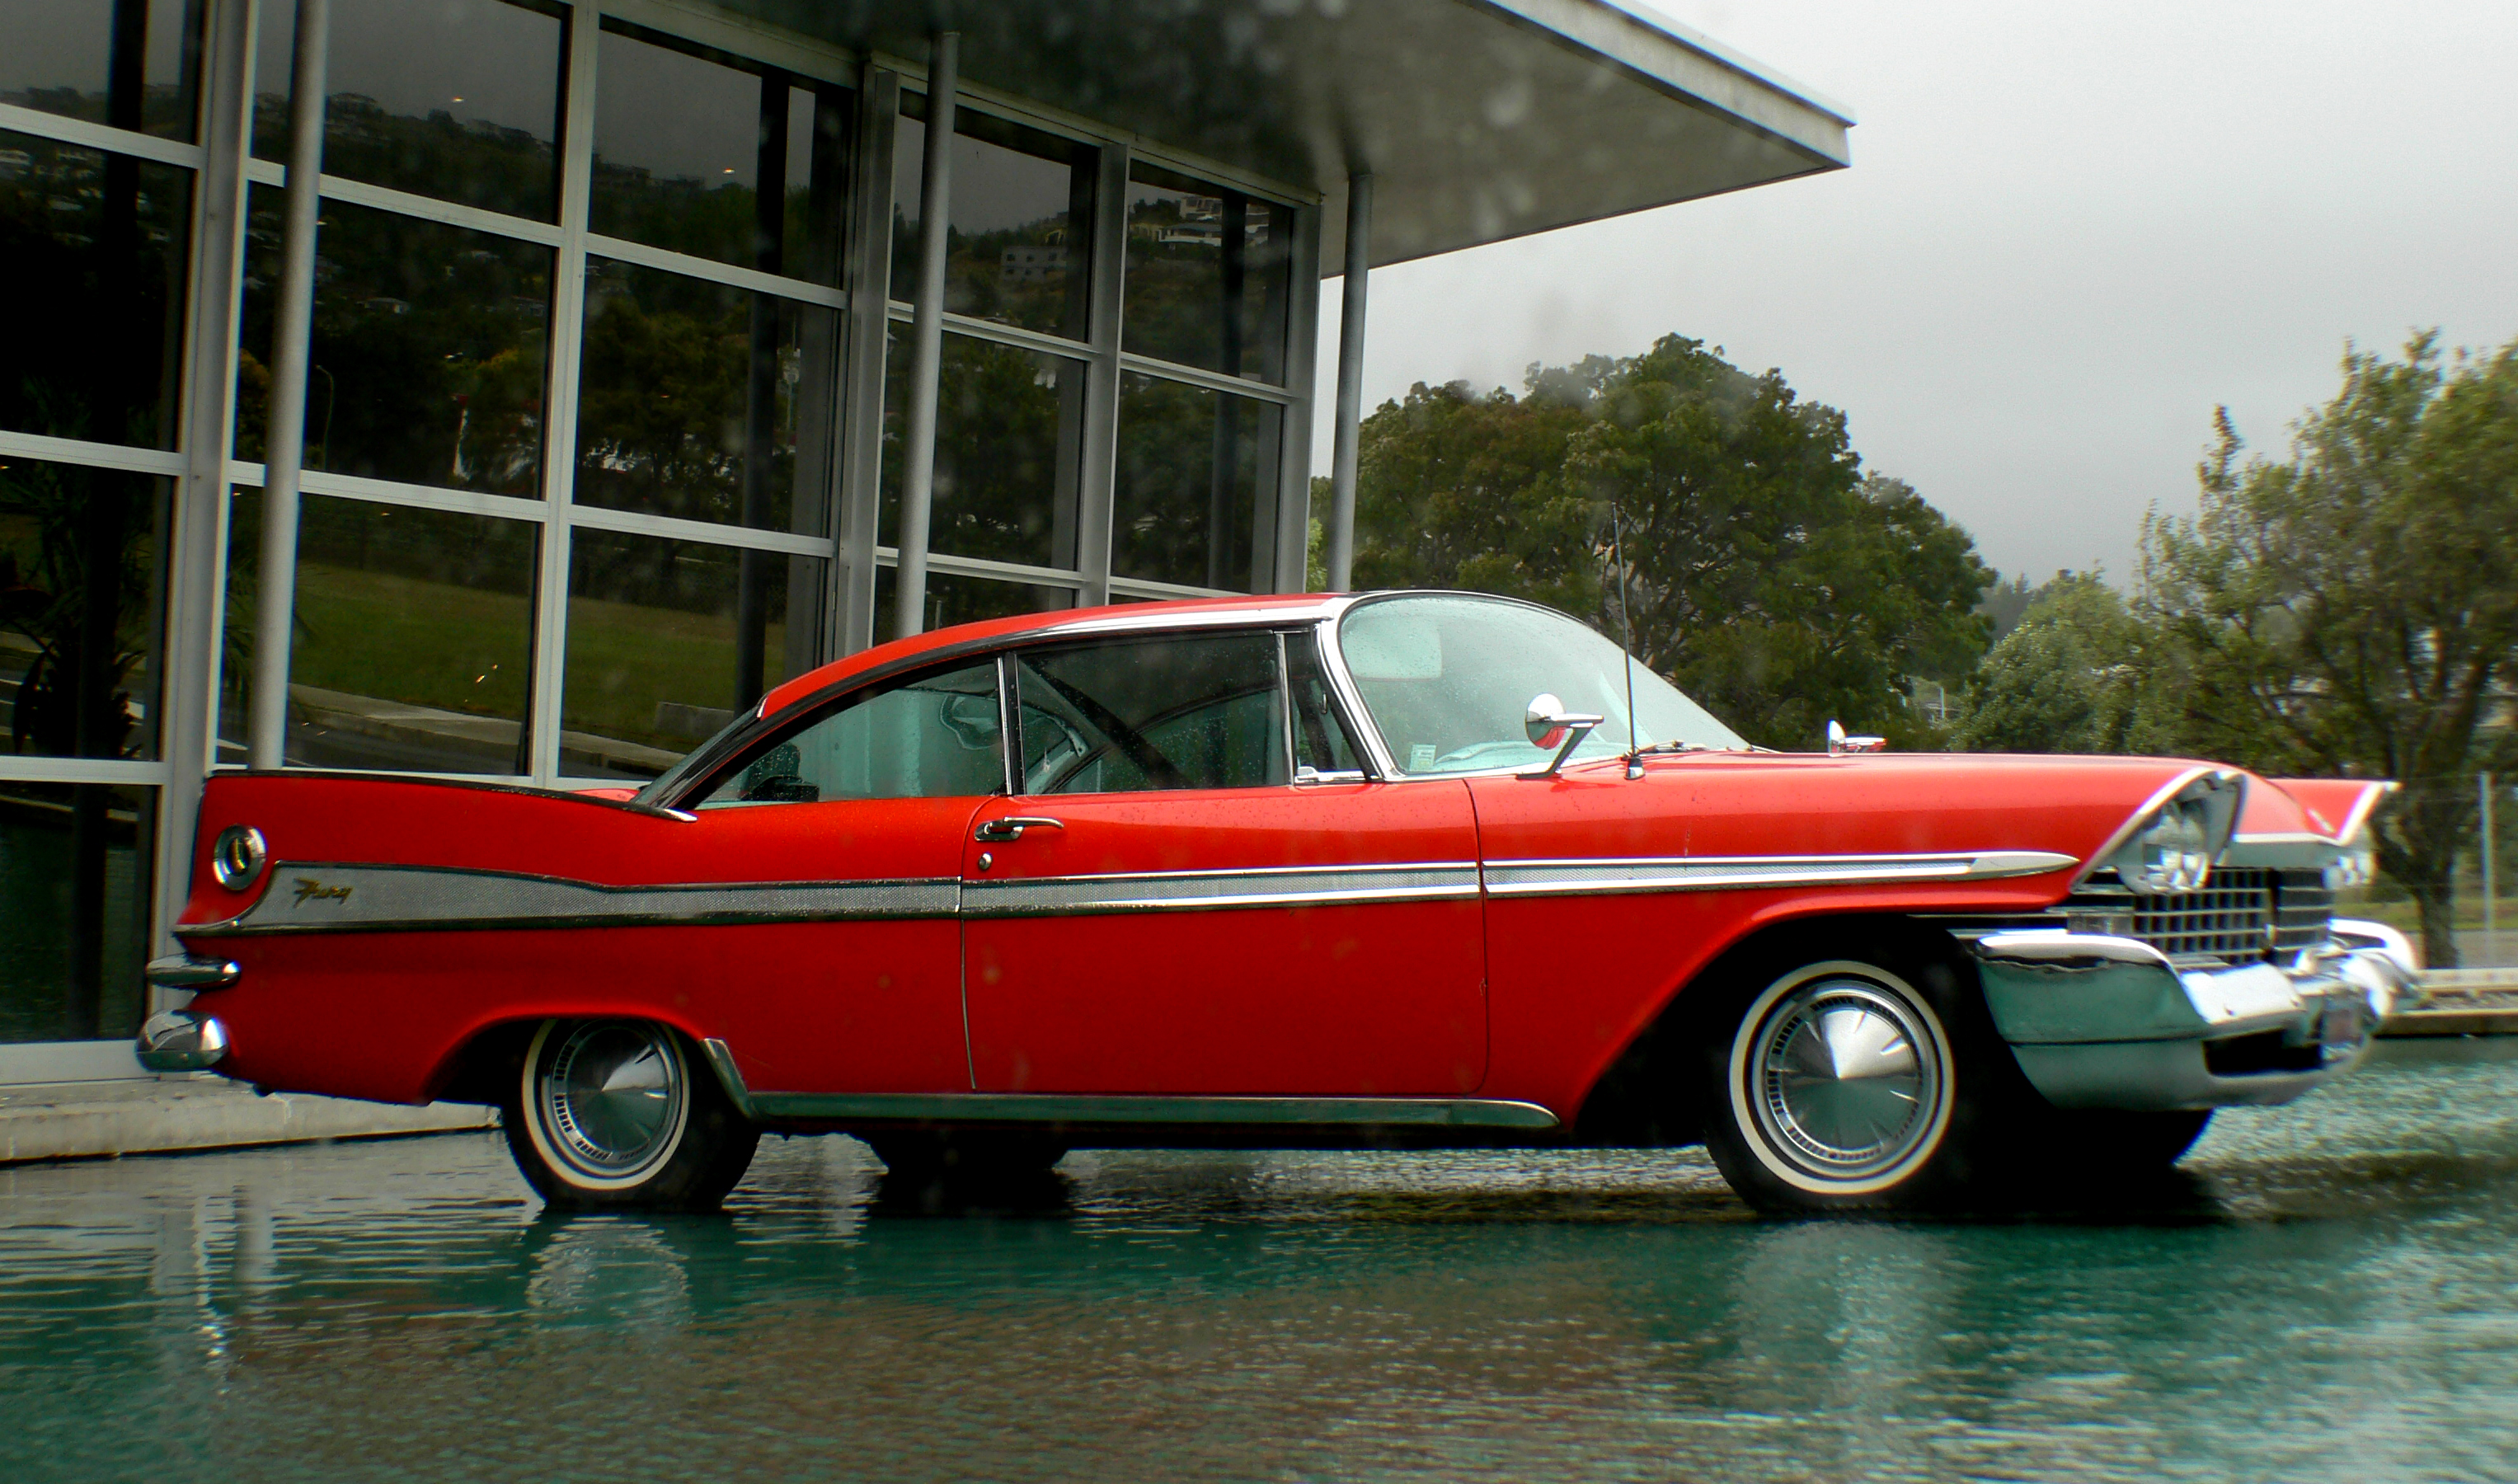 Plymouth sports fury 1959 361 cu in (5.9 litres) photo